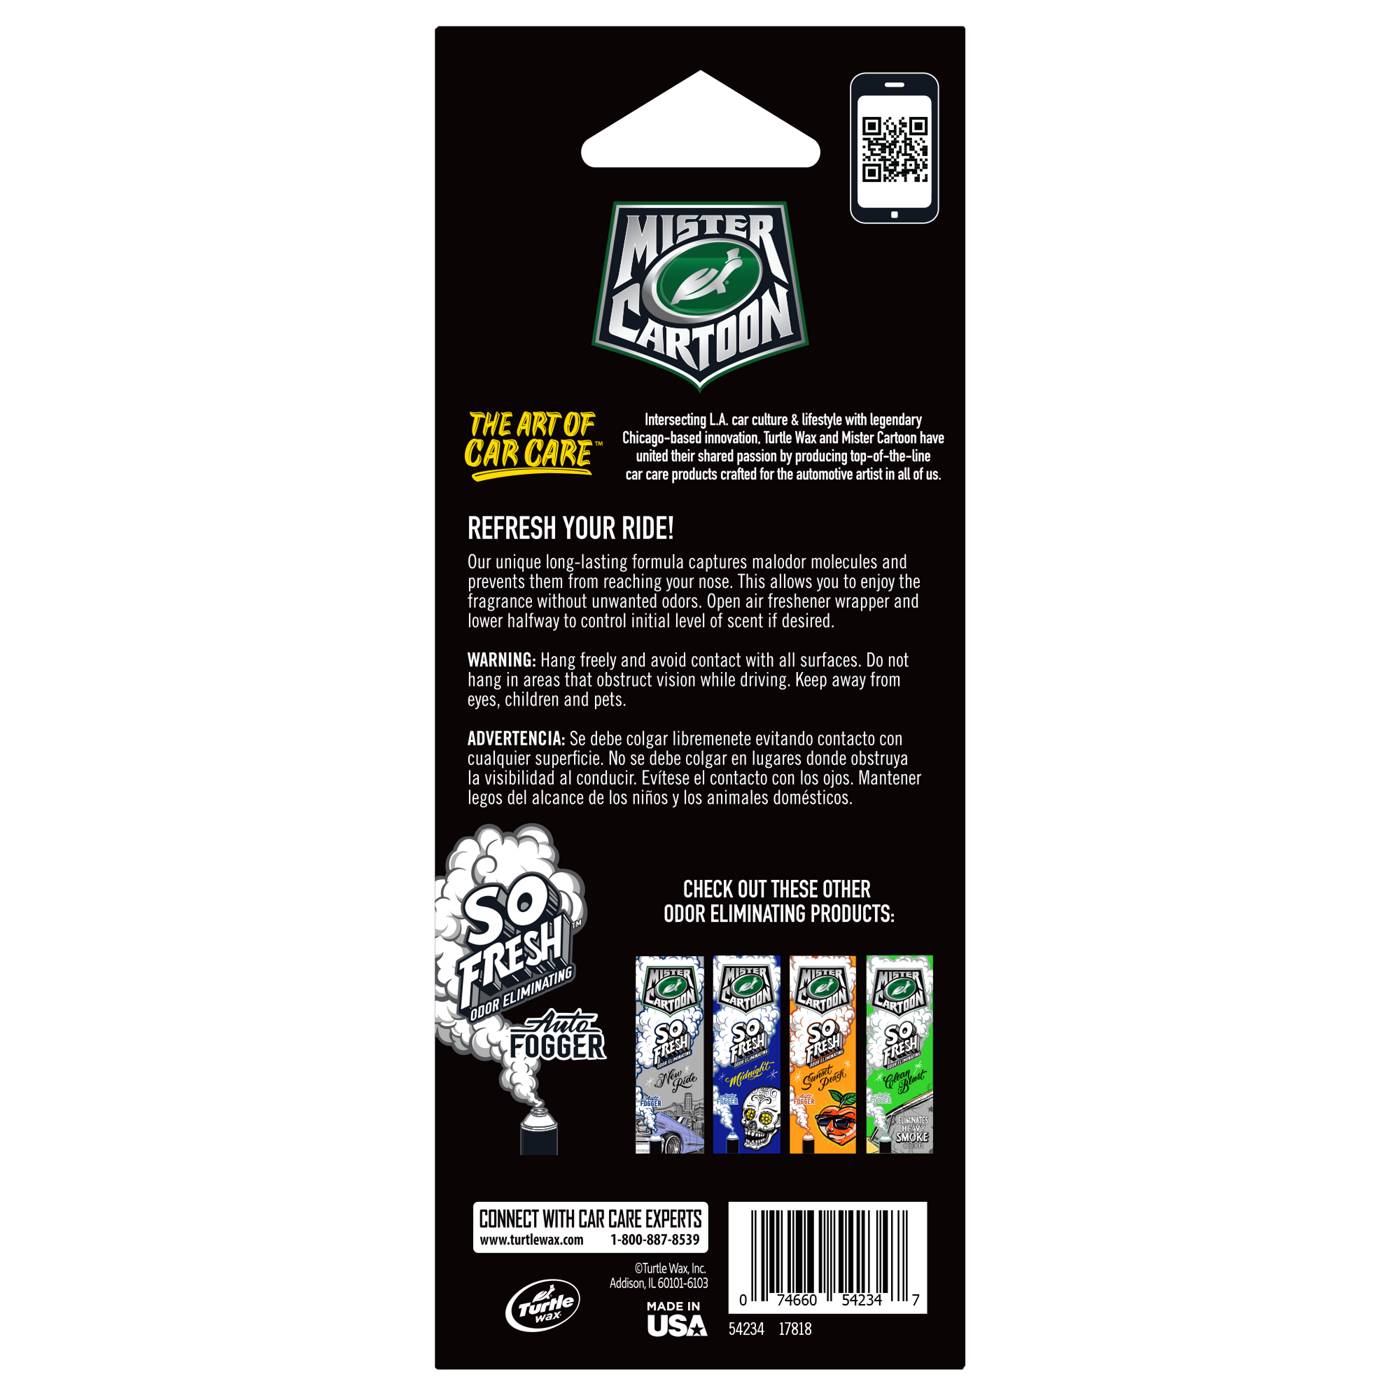 Turtle Wax Mister Cartoon Paper Air Fresheners - Clown Town; image 2 of 2